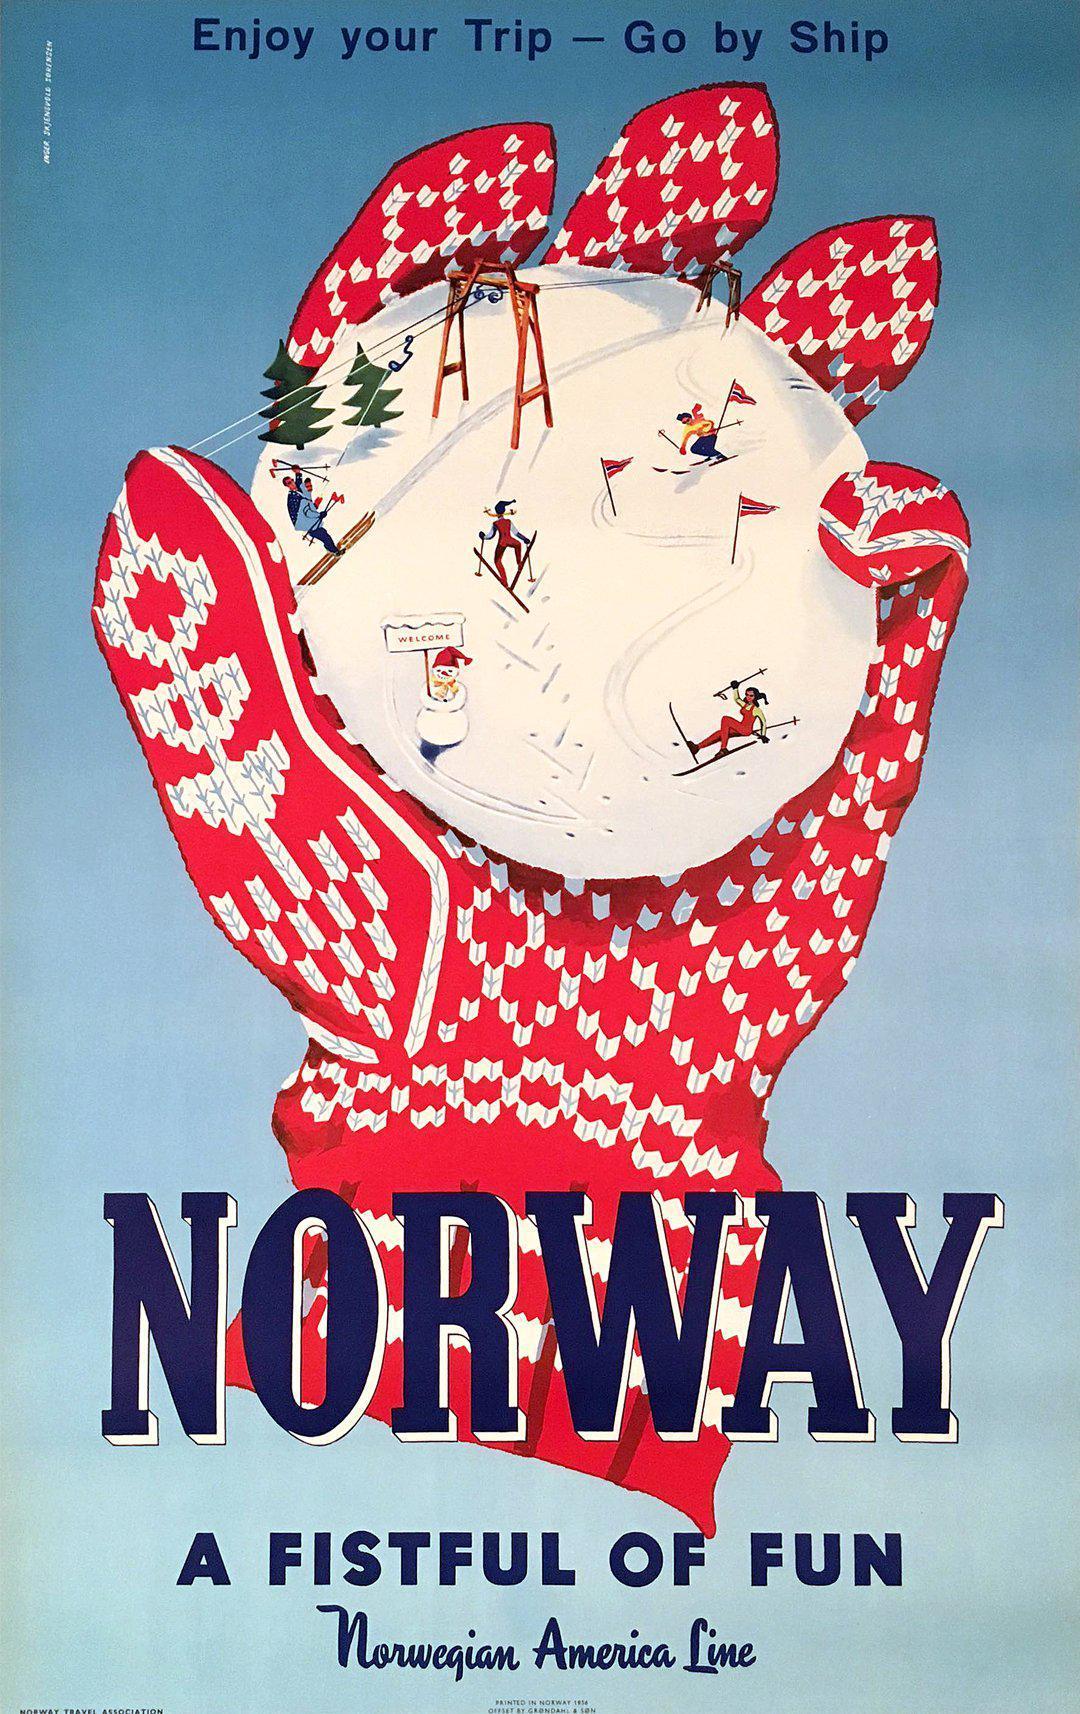 Original Vintage Norway Travel Poster A Fistful of Fun by Inger Skjensvold - Skiing 1956